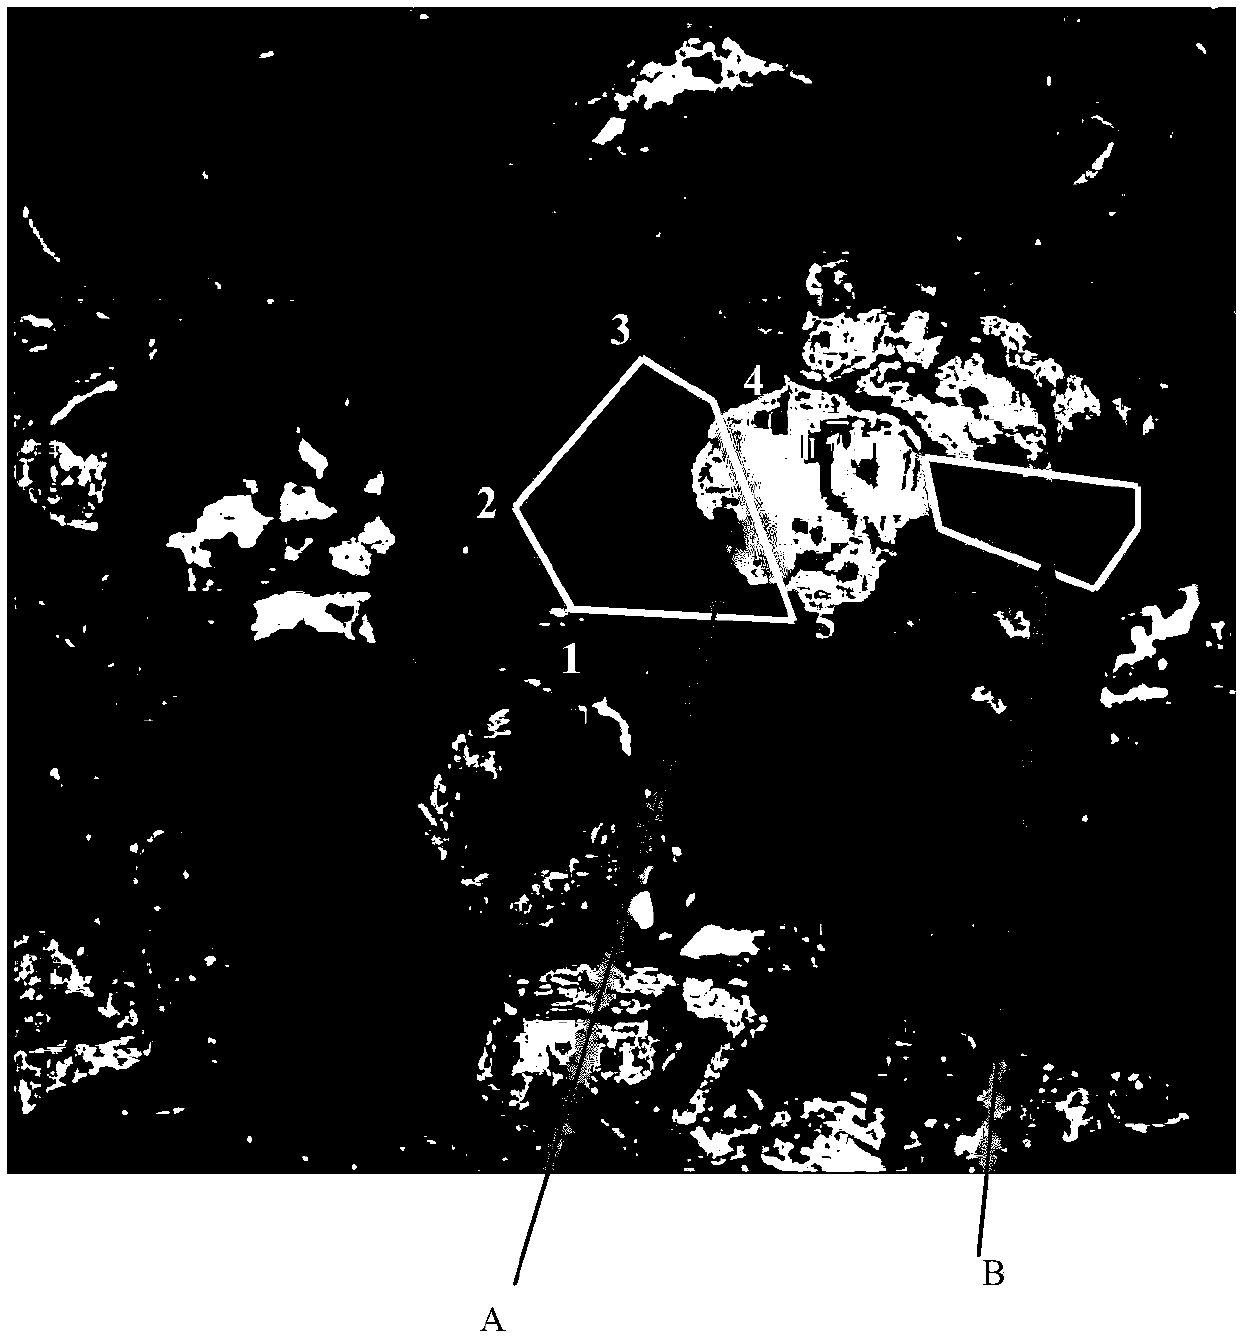 Method for matching mineral analysis image with scanning electron microscope image